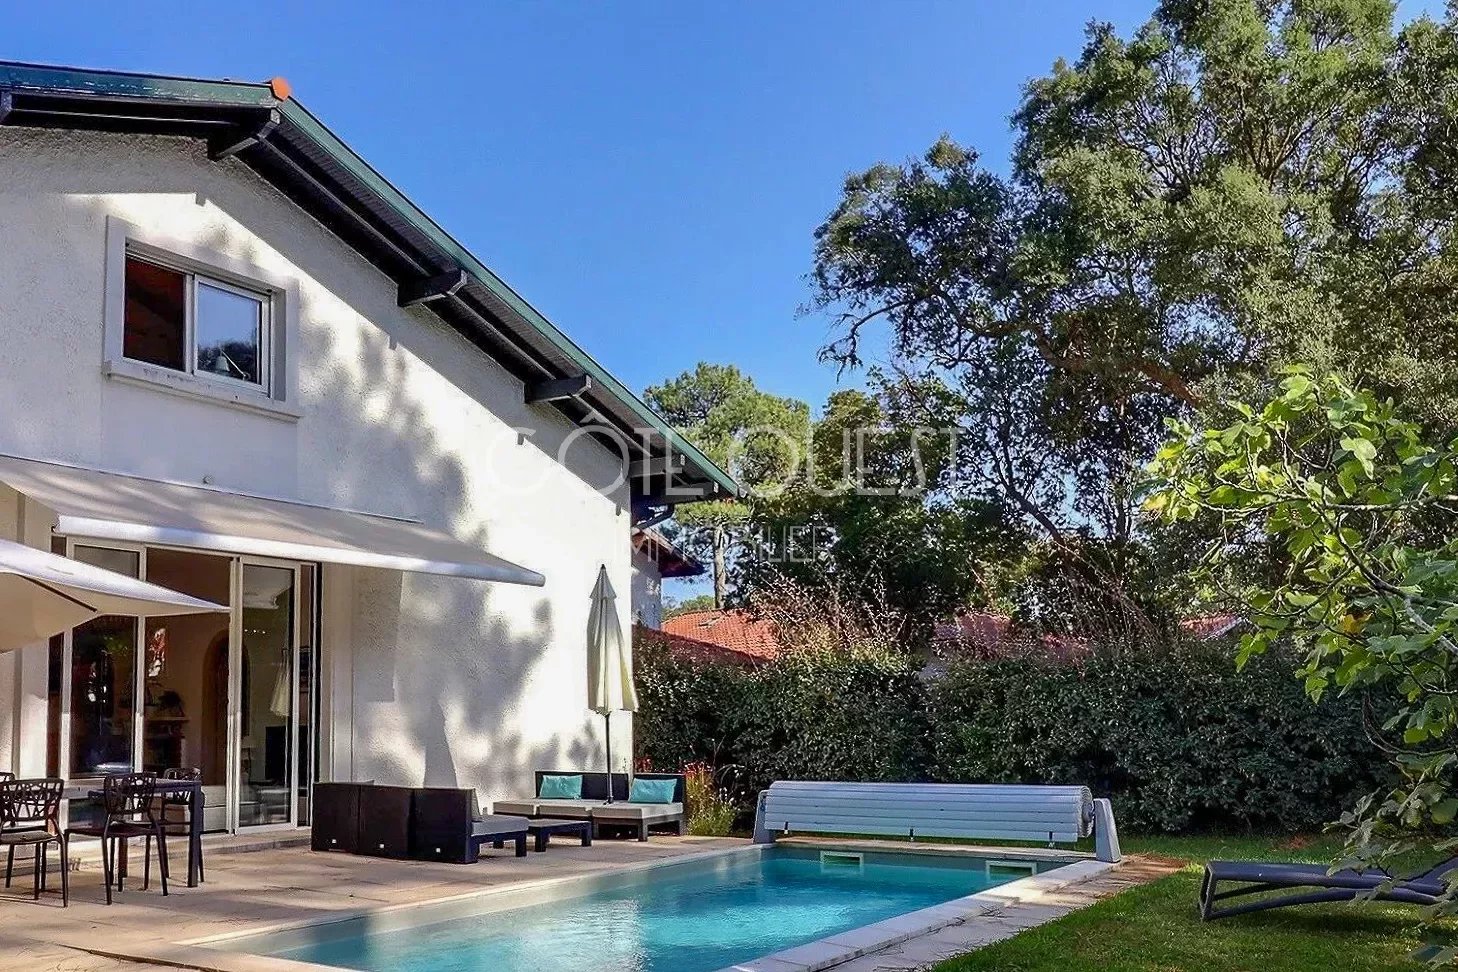 HOSSEGOR – A 7-BED VILLA WITH A SWIMMING POOL